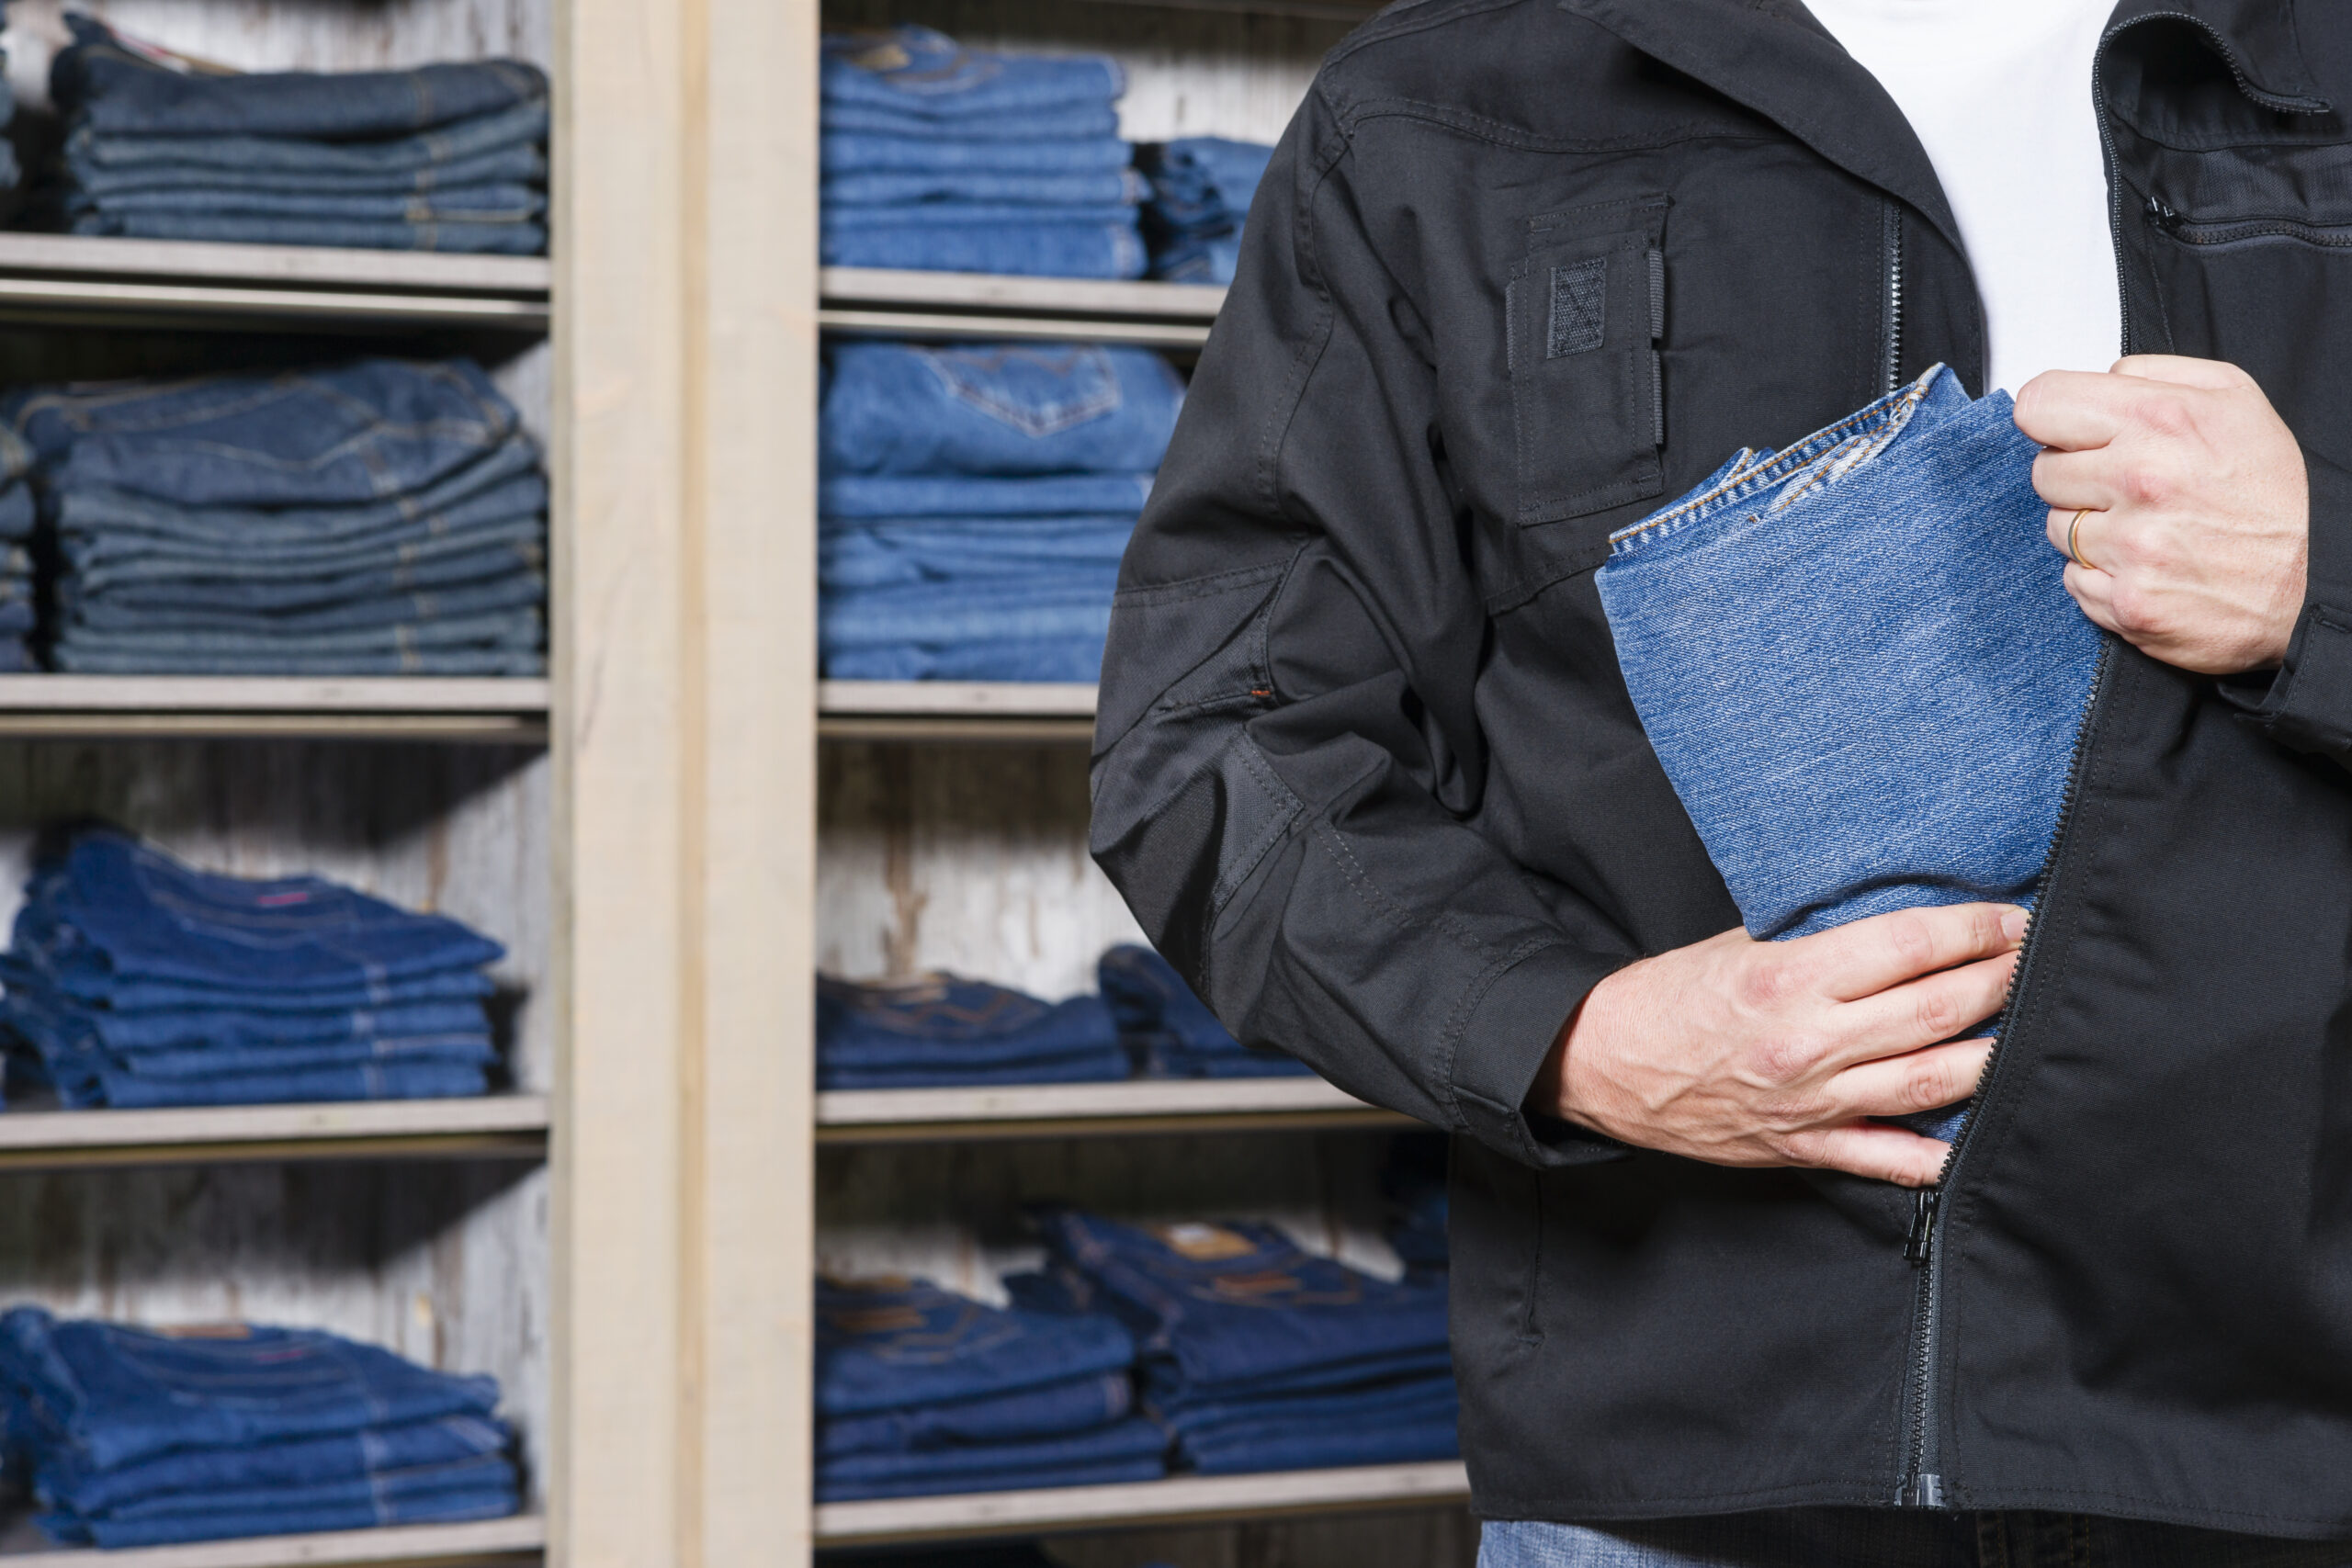 A man holding jeans in front of shelves.